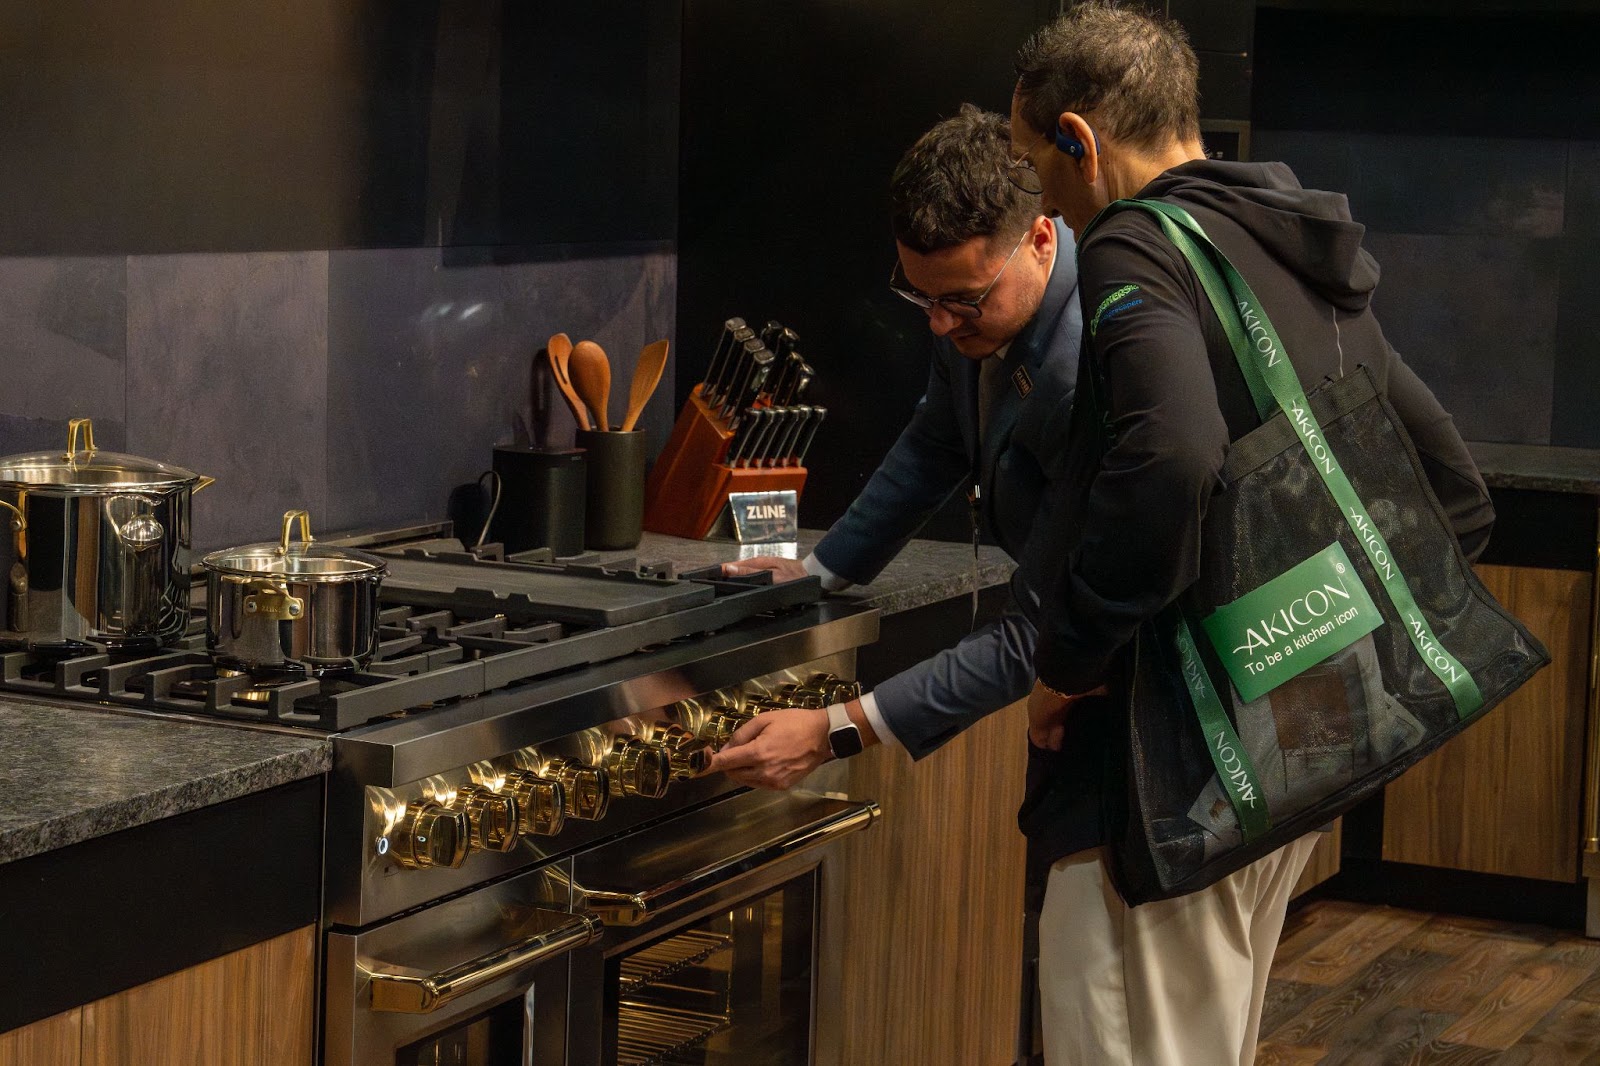 Two individuals inspecting a professional gas range (ZLINE's SGR48) with brass details at a trade show. The stove is accompanied by stainless steel cookware and a set of knives, against a backdrop of dark kitchen cabinetry.